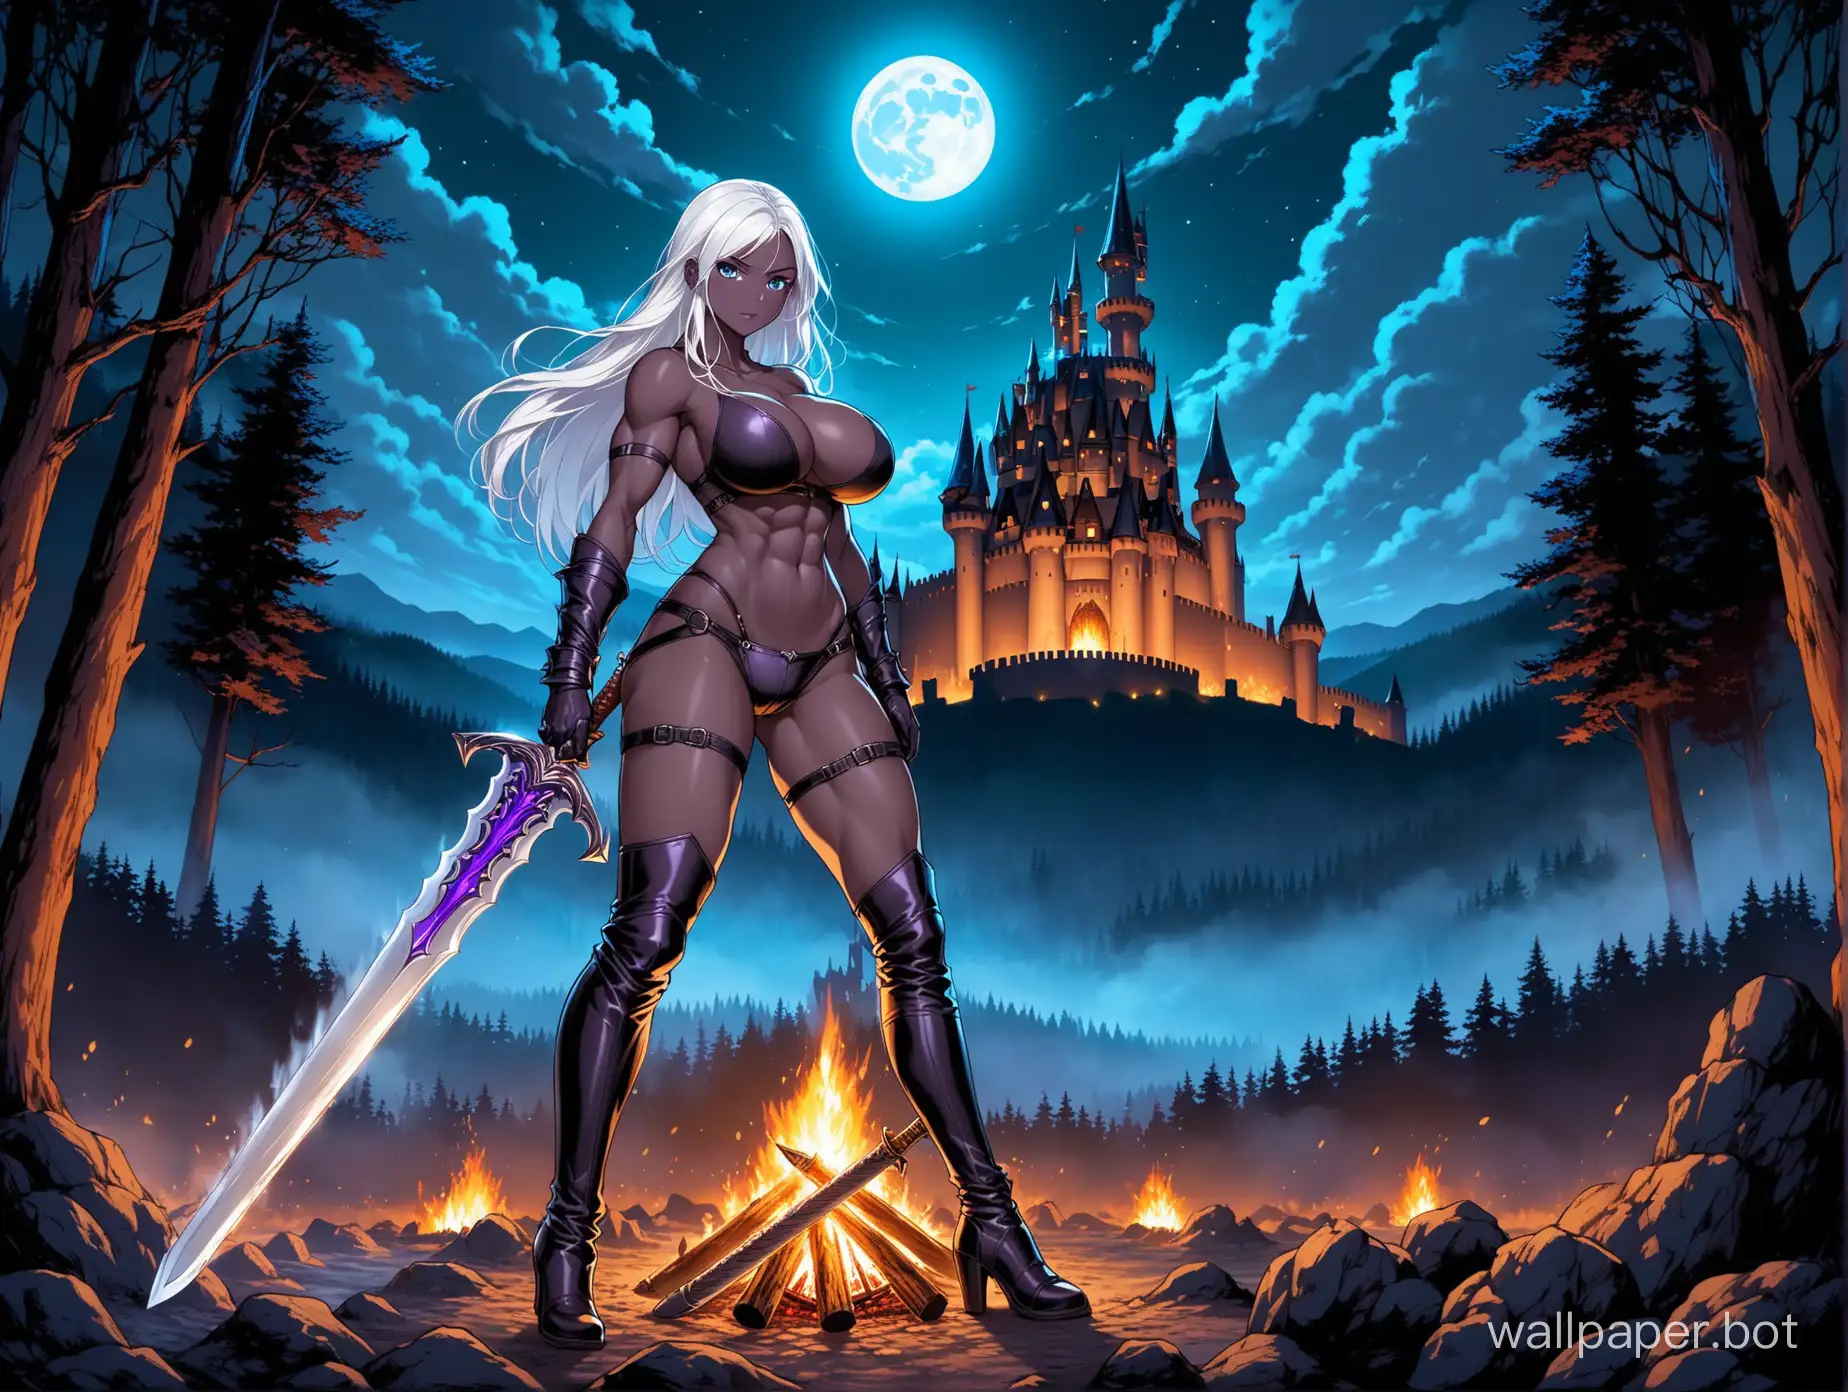 Powerful-Female-Warrior-with-Colossal-Sword-in-Forest-at-Night